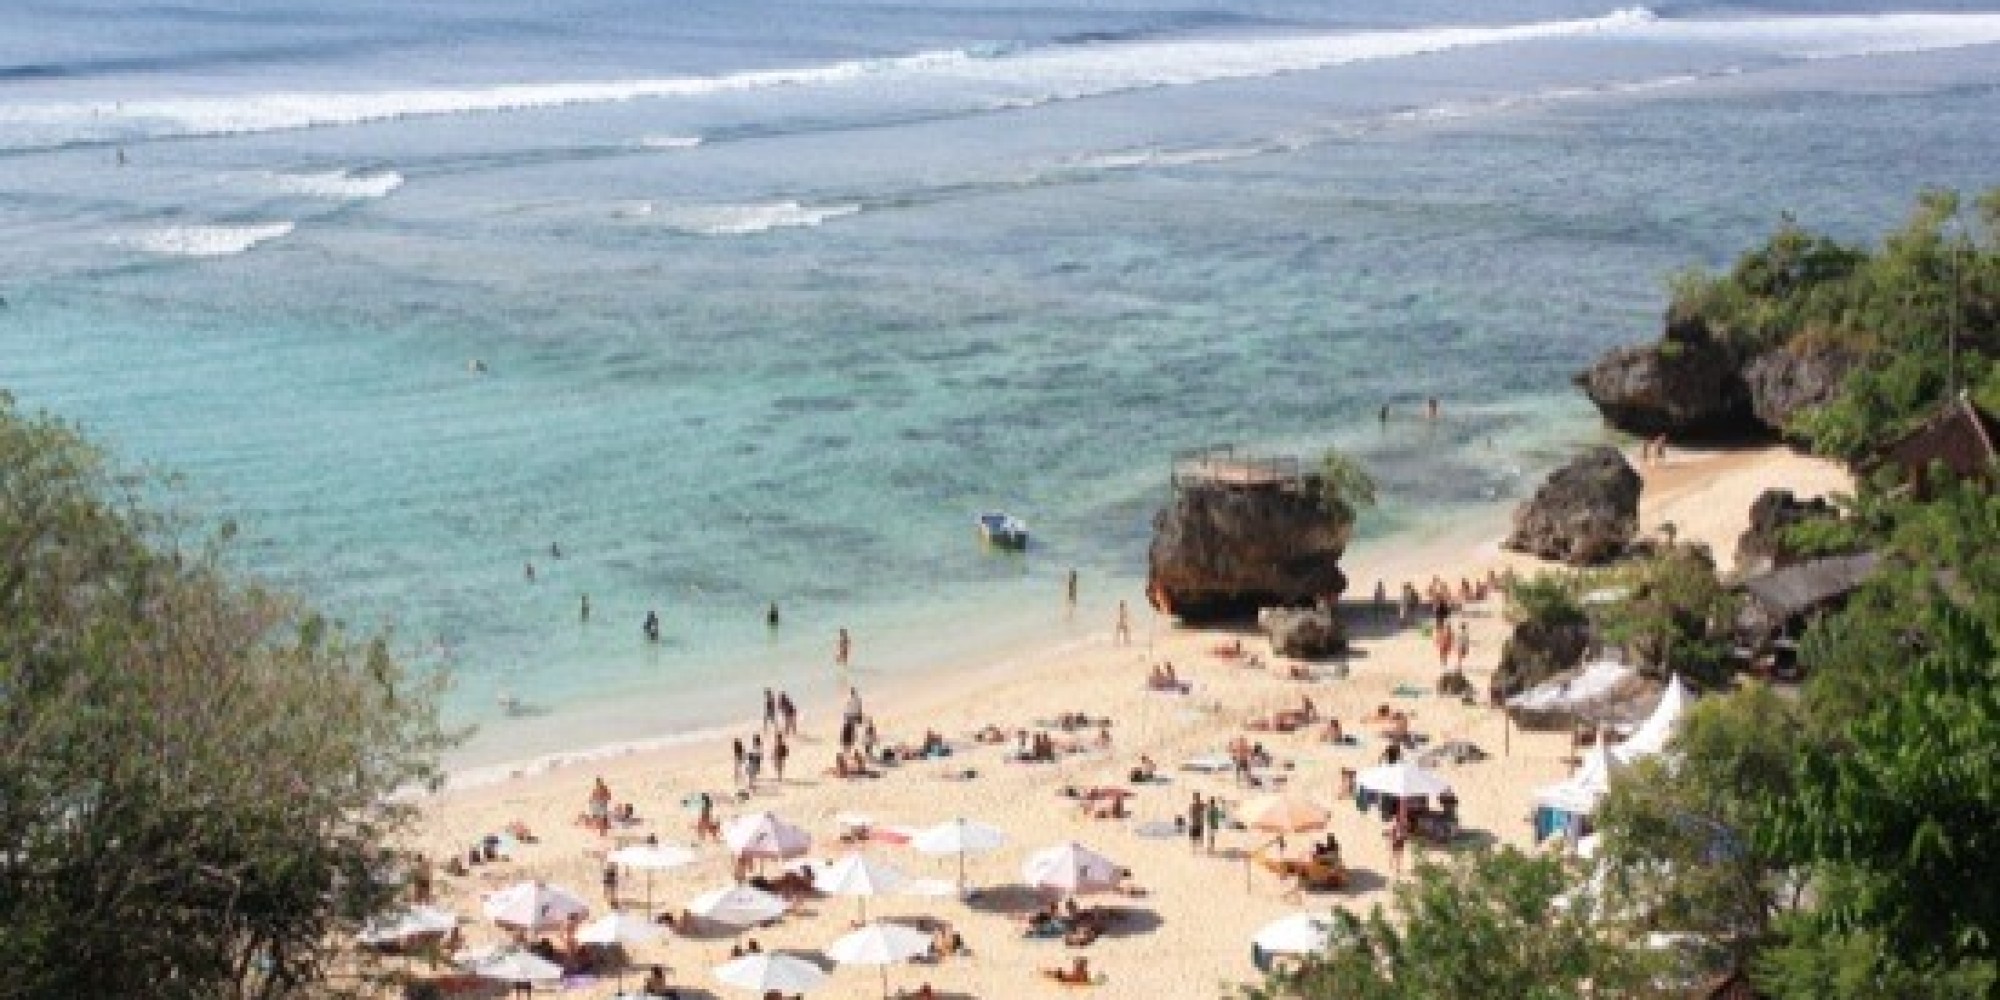 Beautiful Bali: How to Enjoy It Despite the Crowds | HuffPost